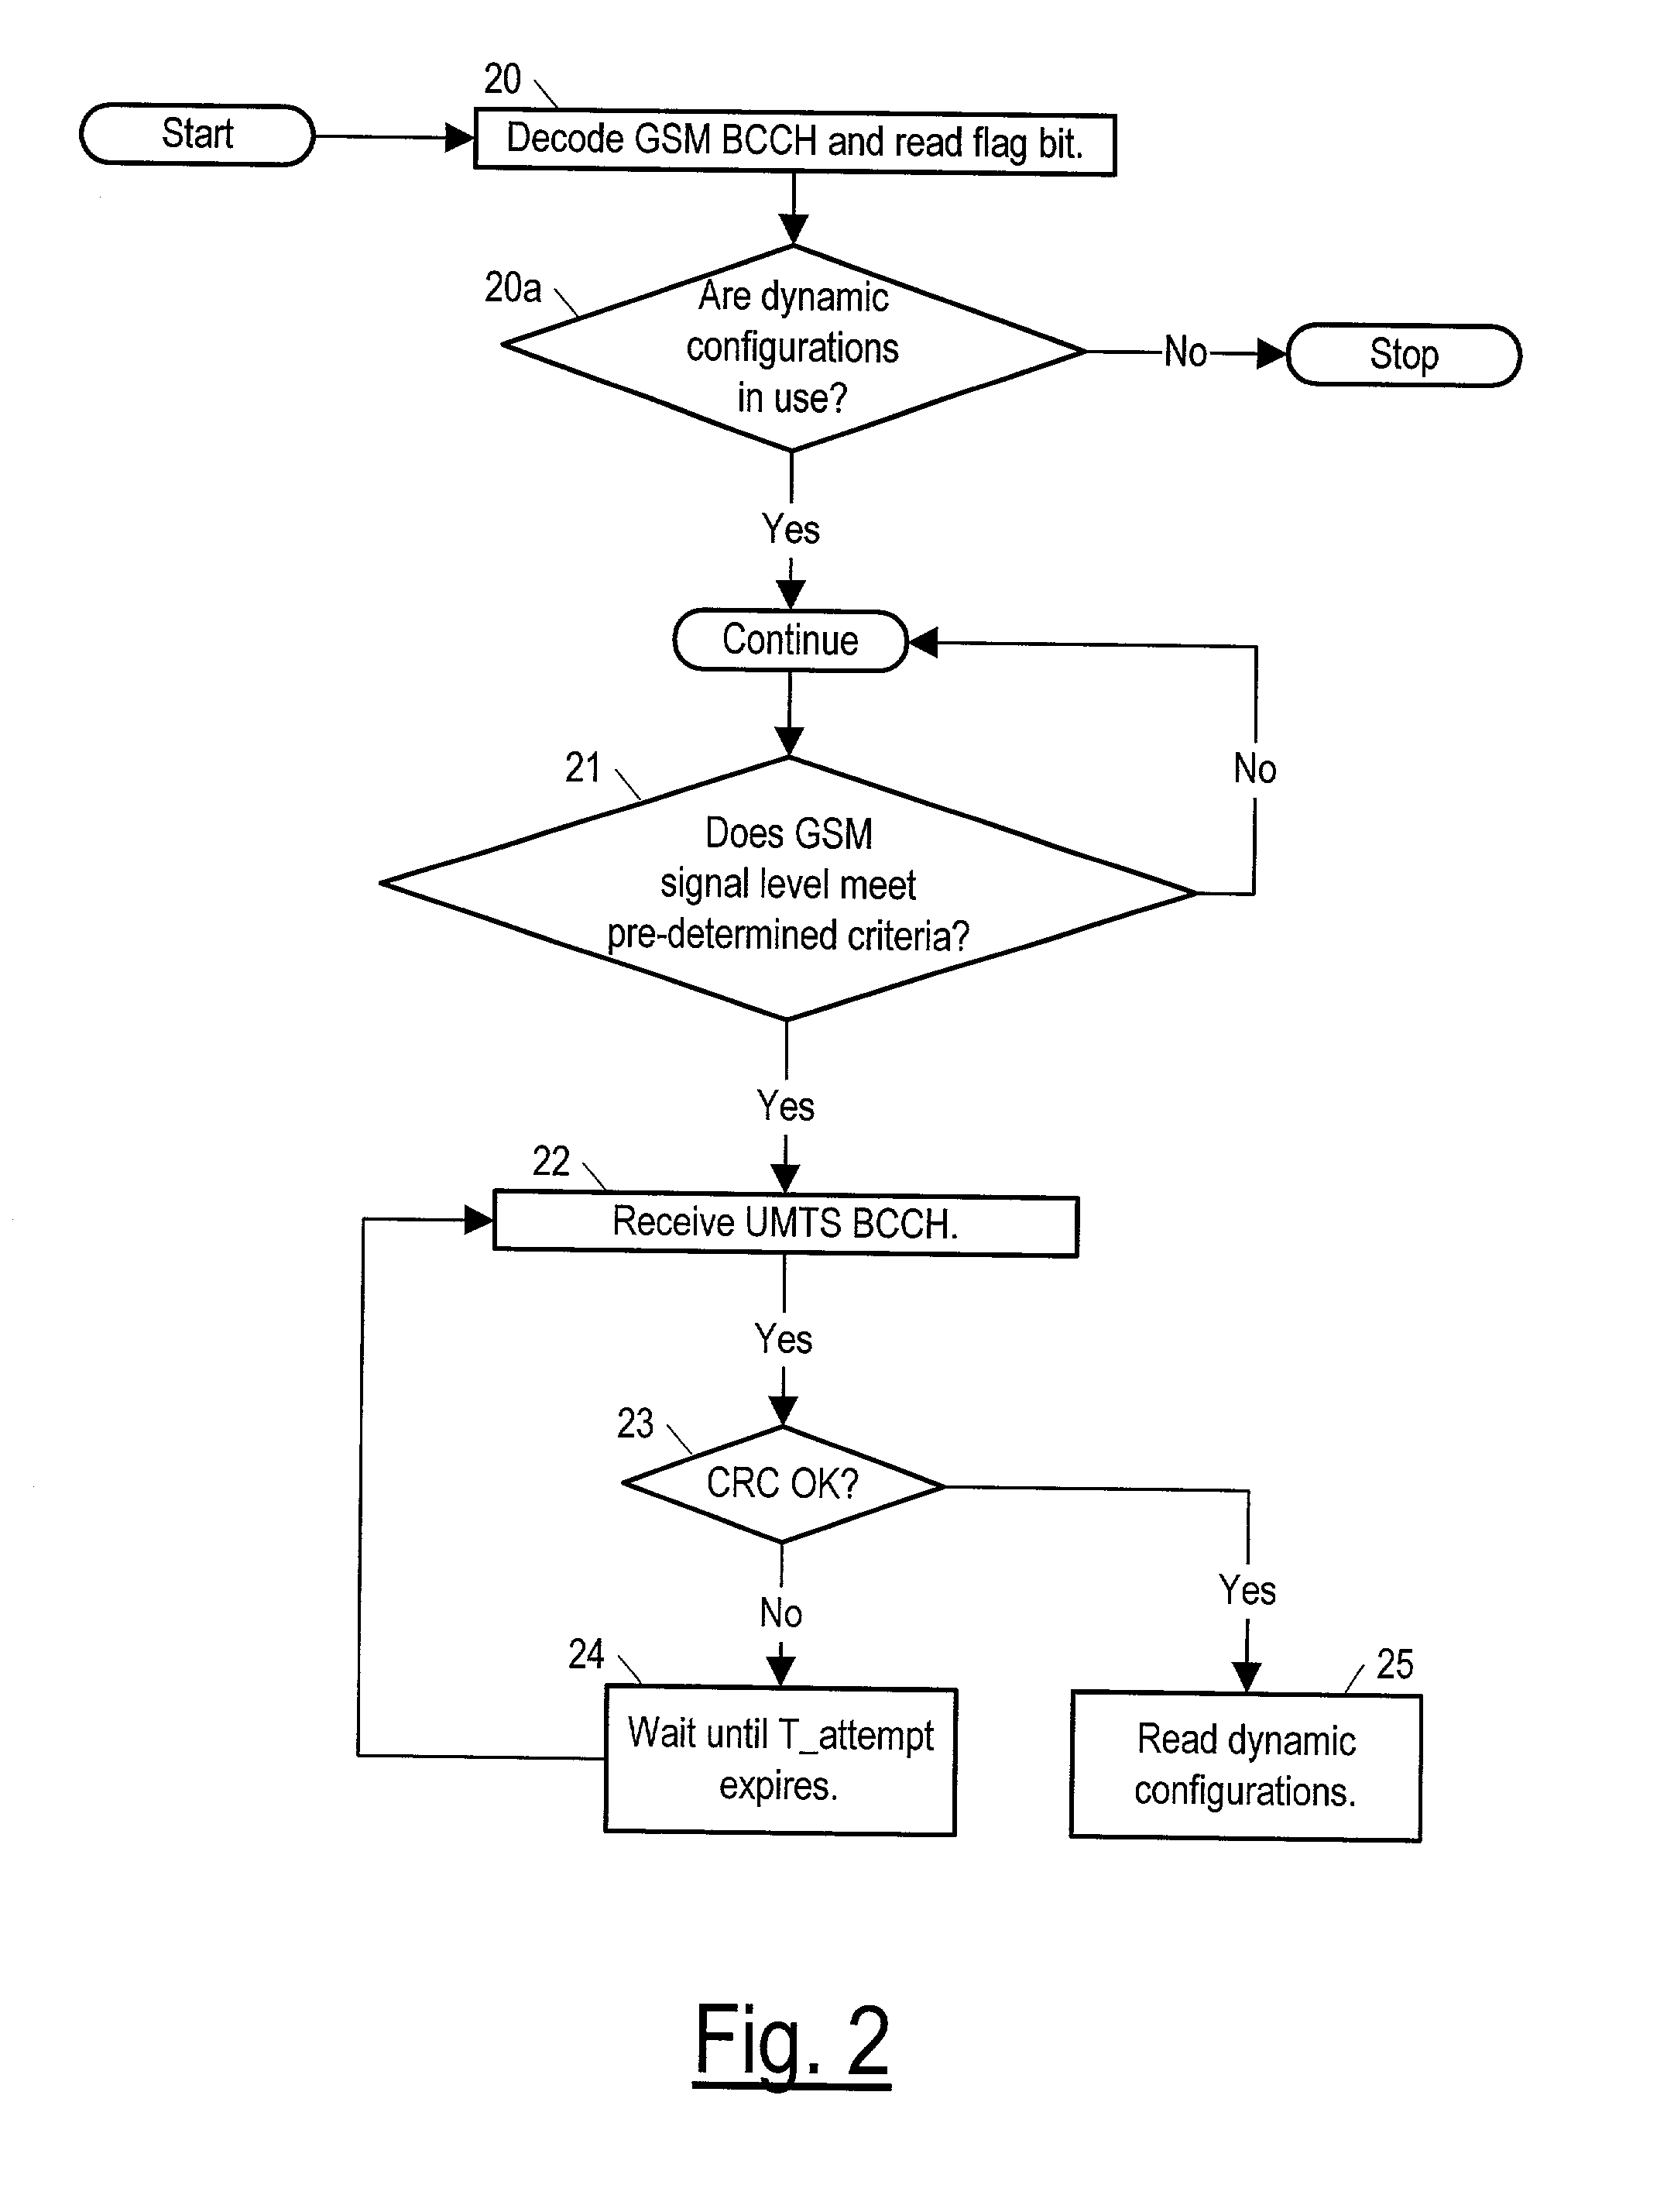 Method and apparatus for transmitting and receiving dynamic configuration parameters in a third generation cellular telephone network